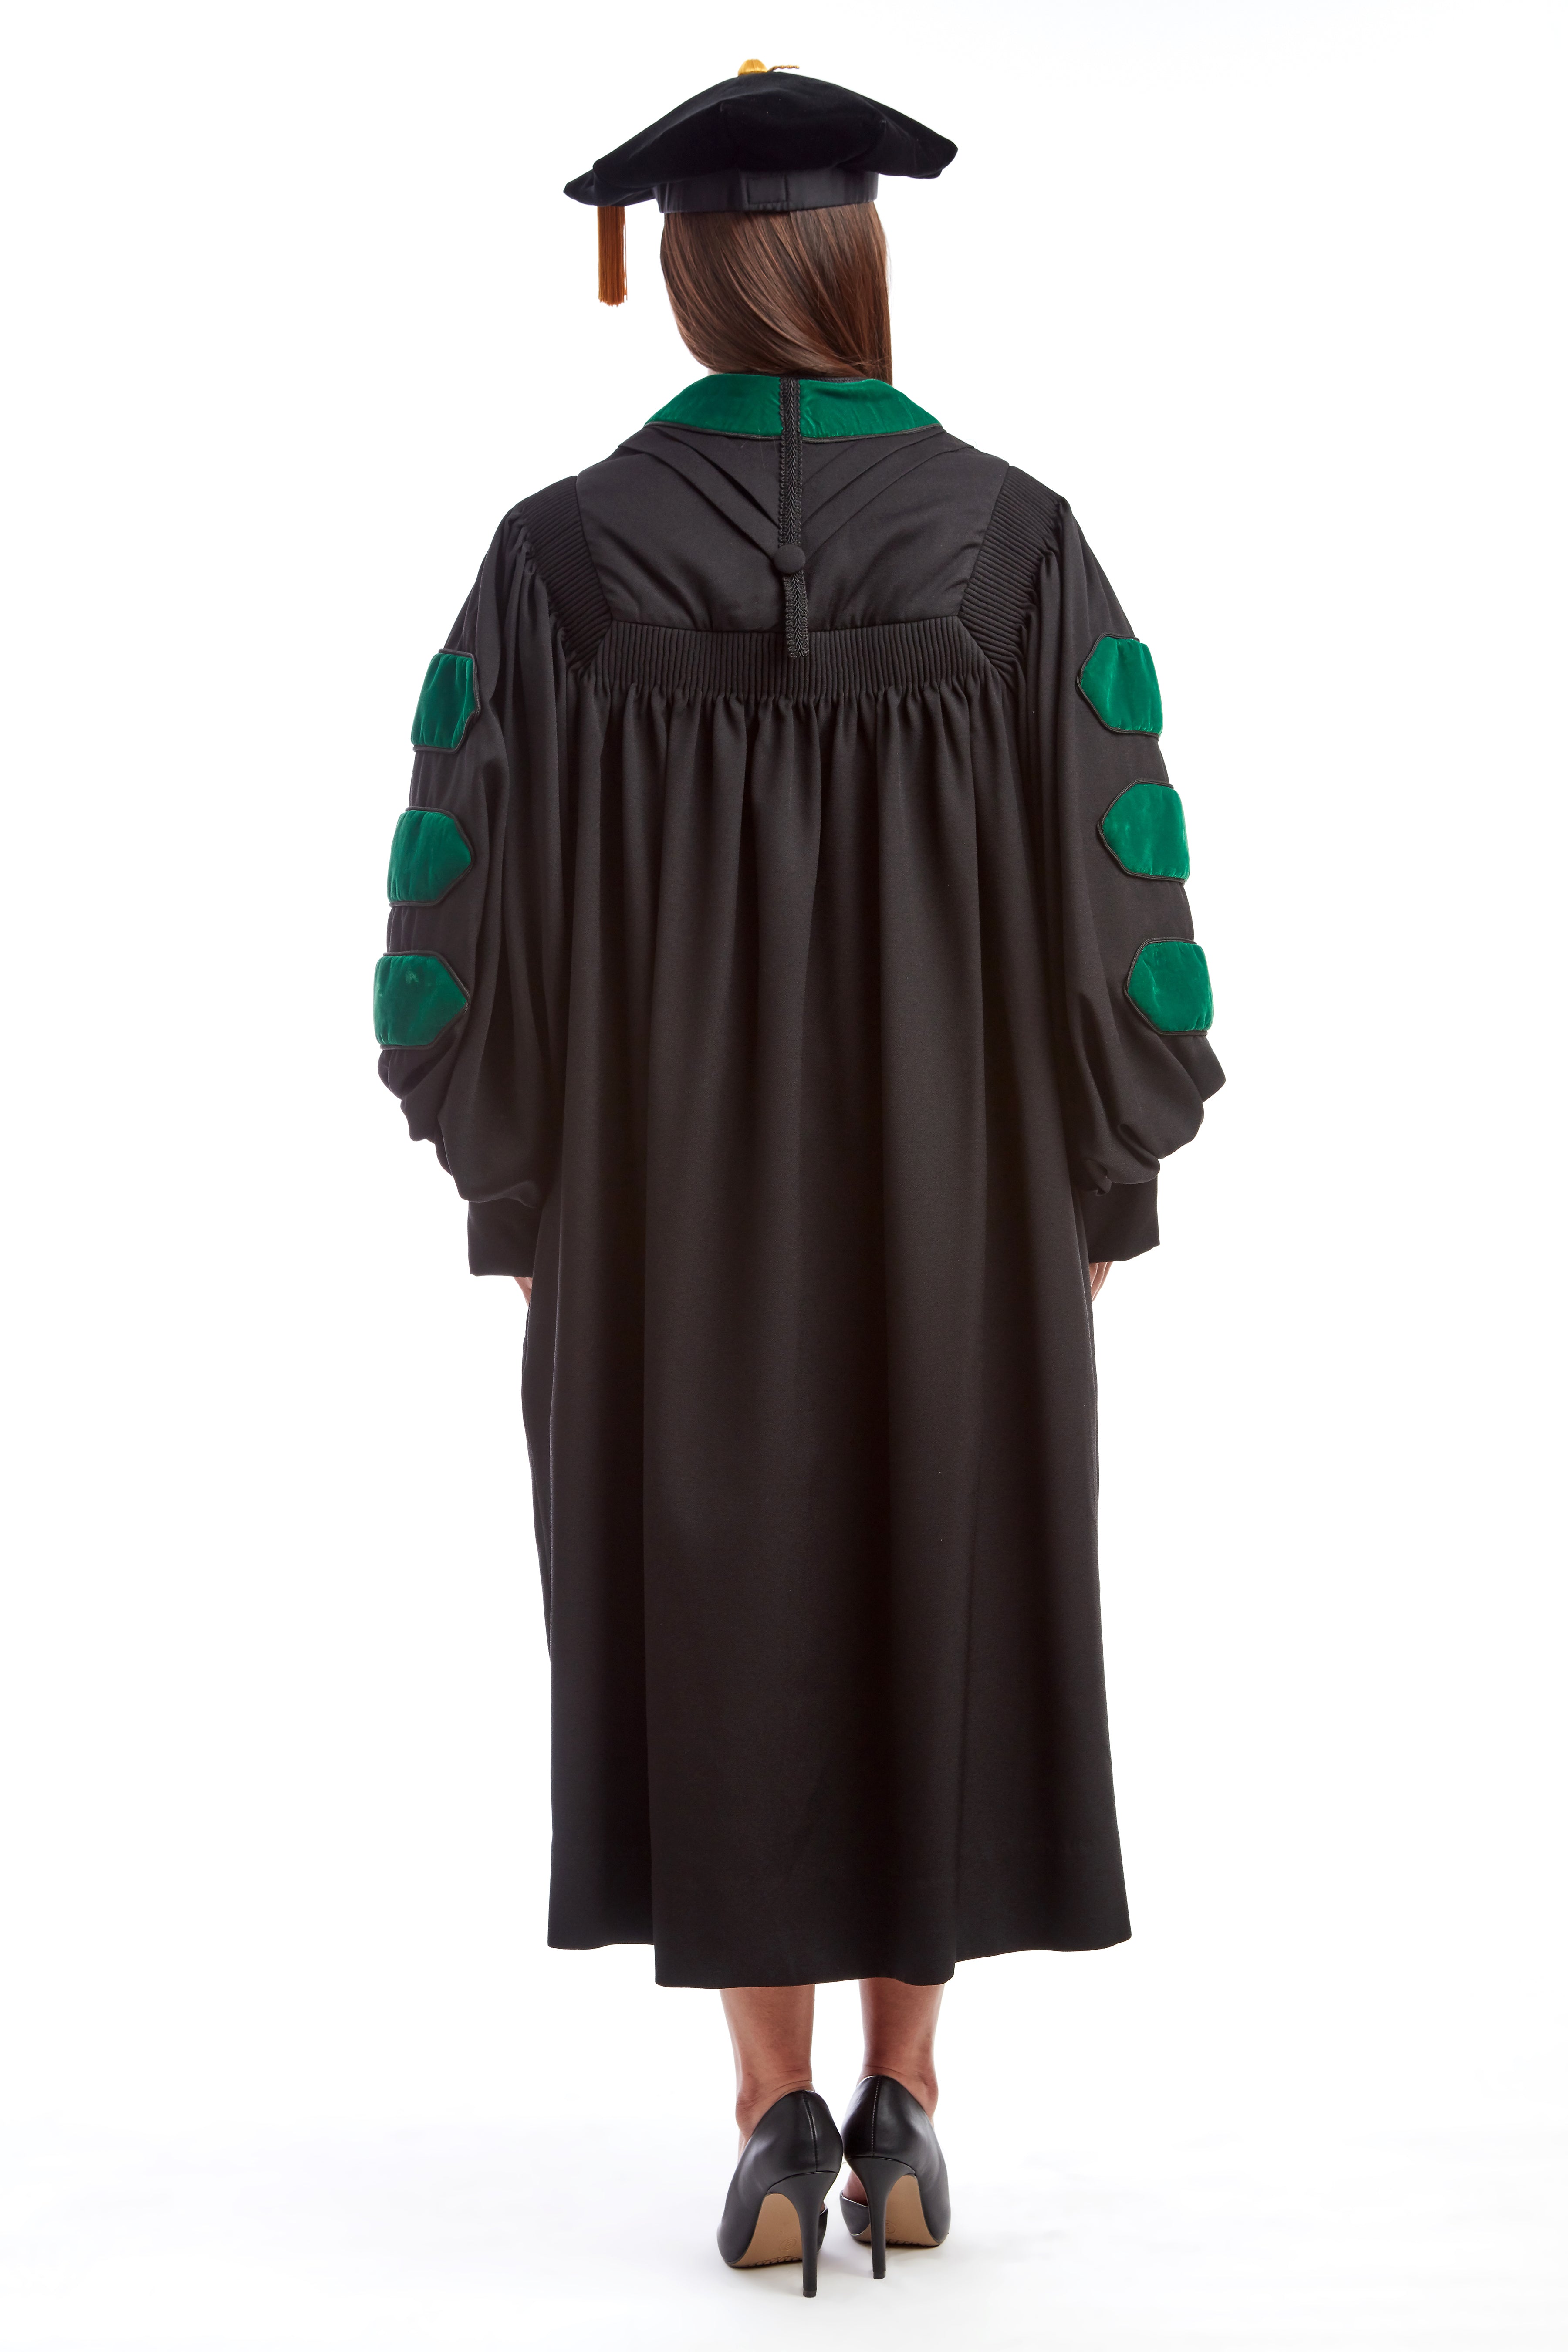 fcity.in - Rudra Fancy Dress Black Convocation Gown For Kids Graduation Gown